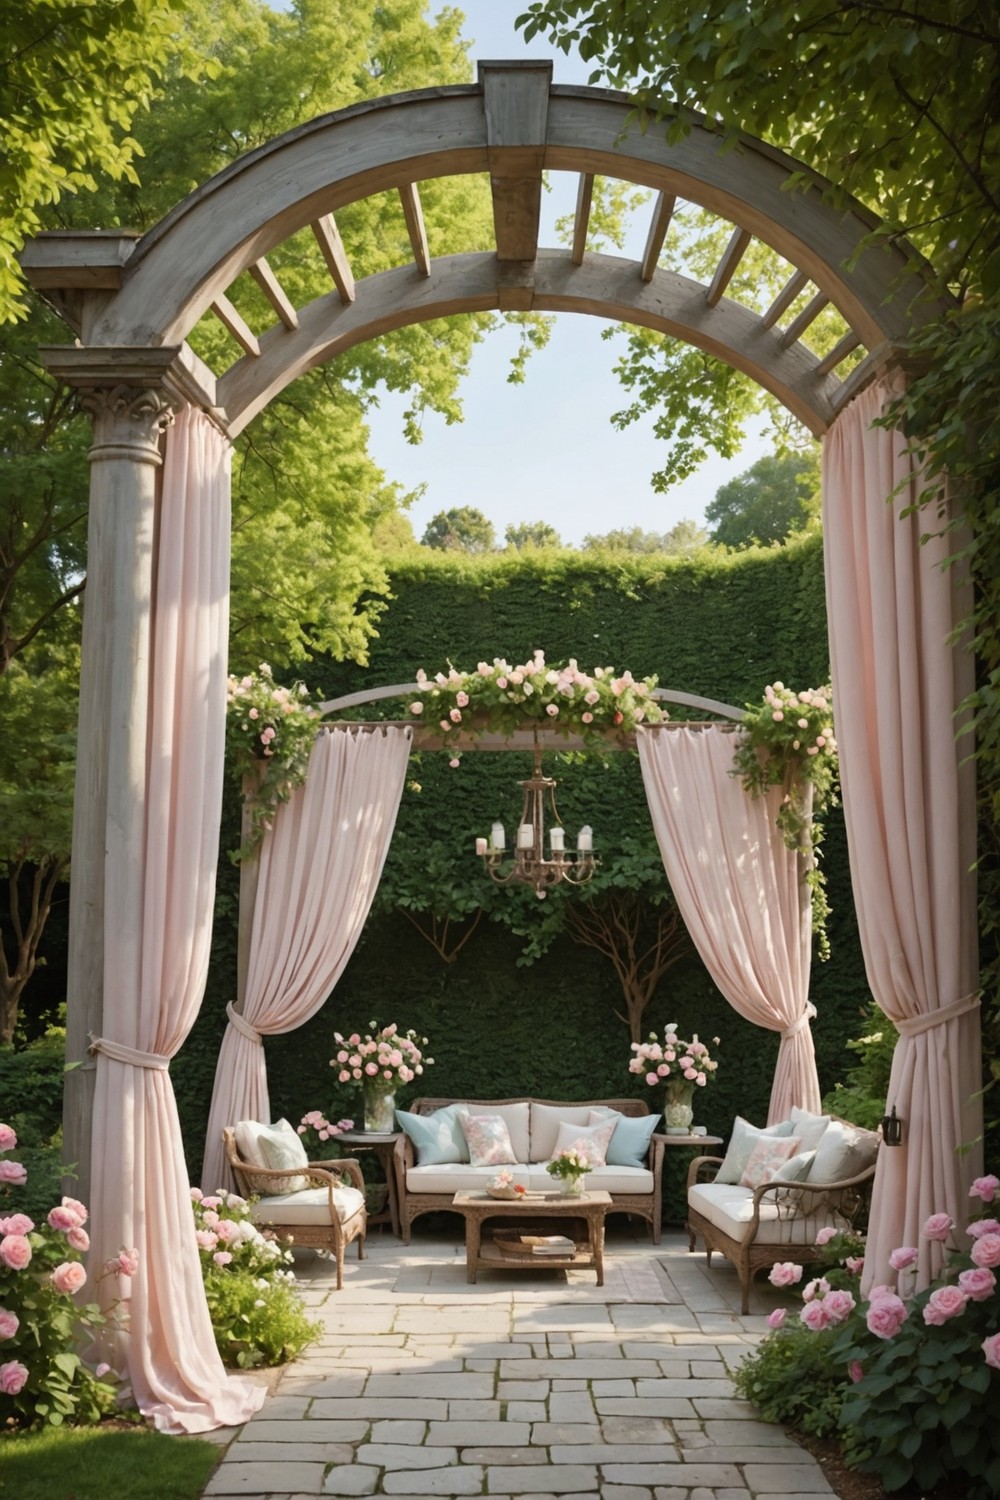 Romantic Arched Pergola with Draped Curtains